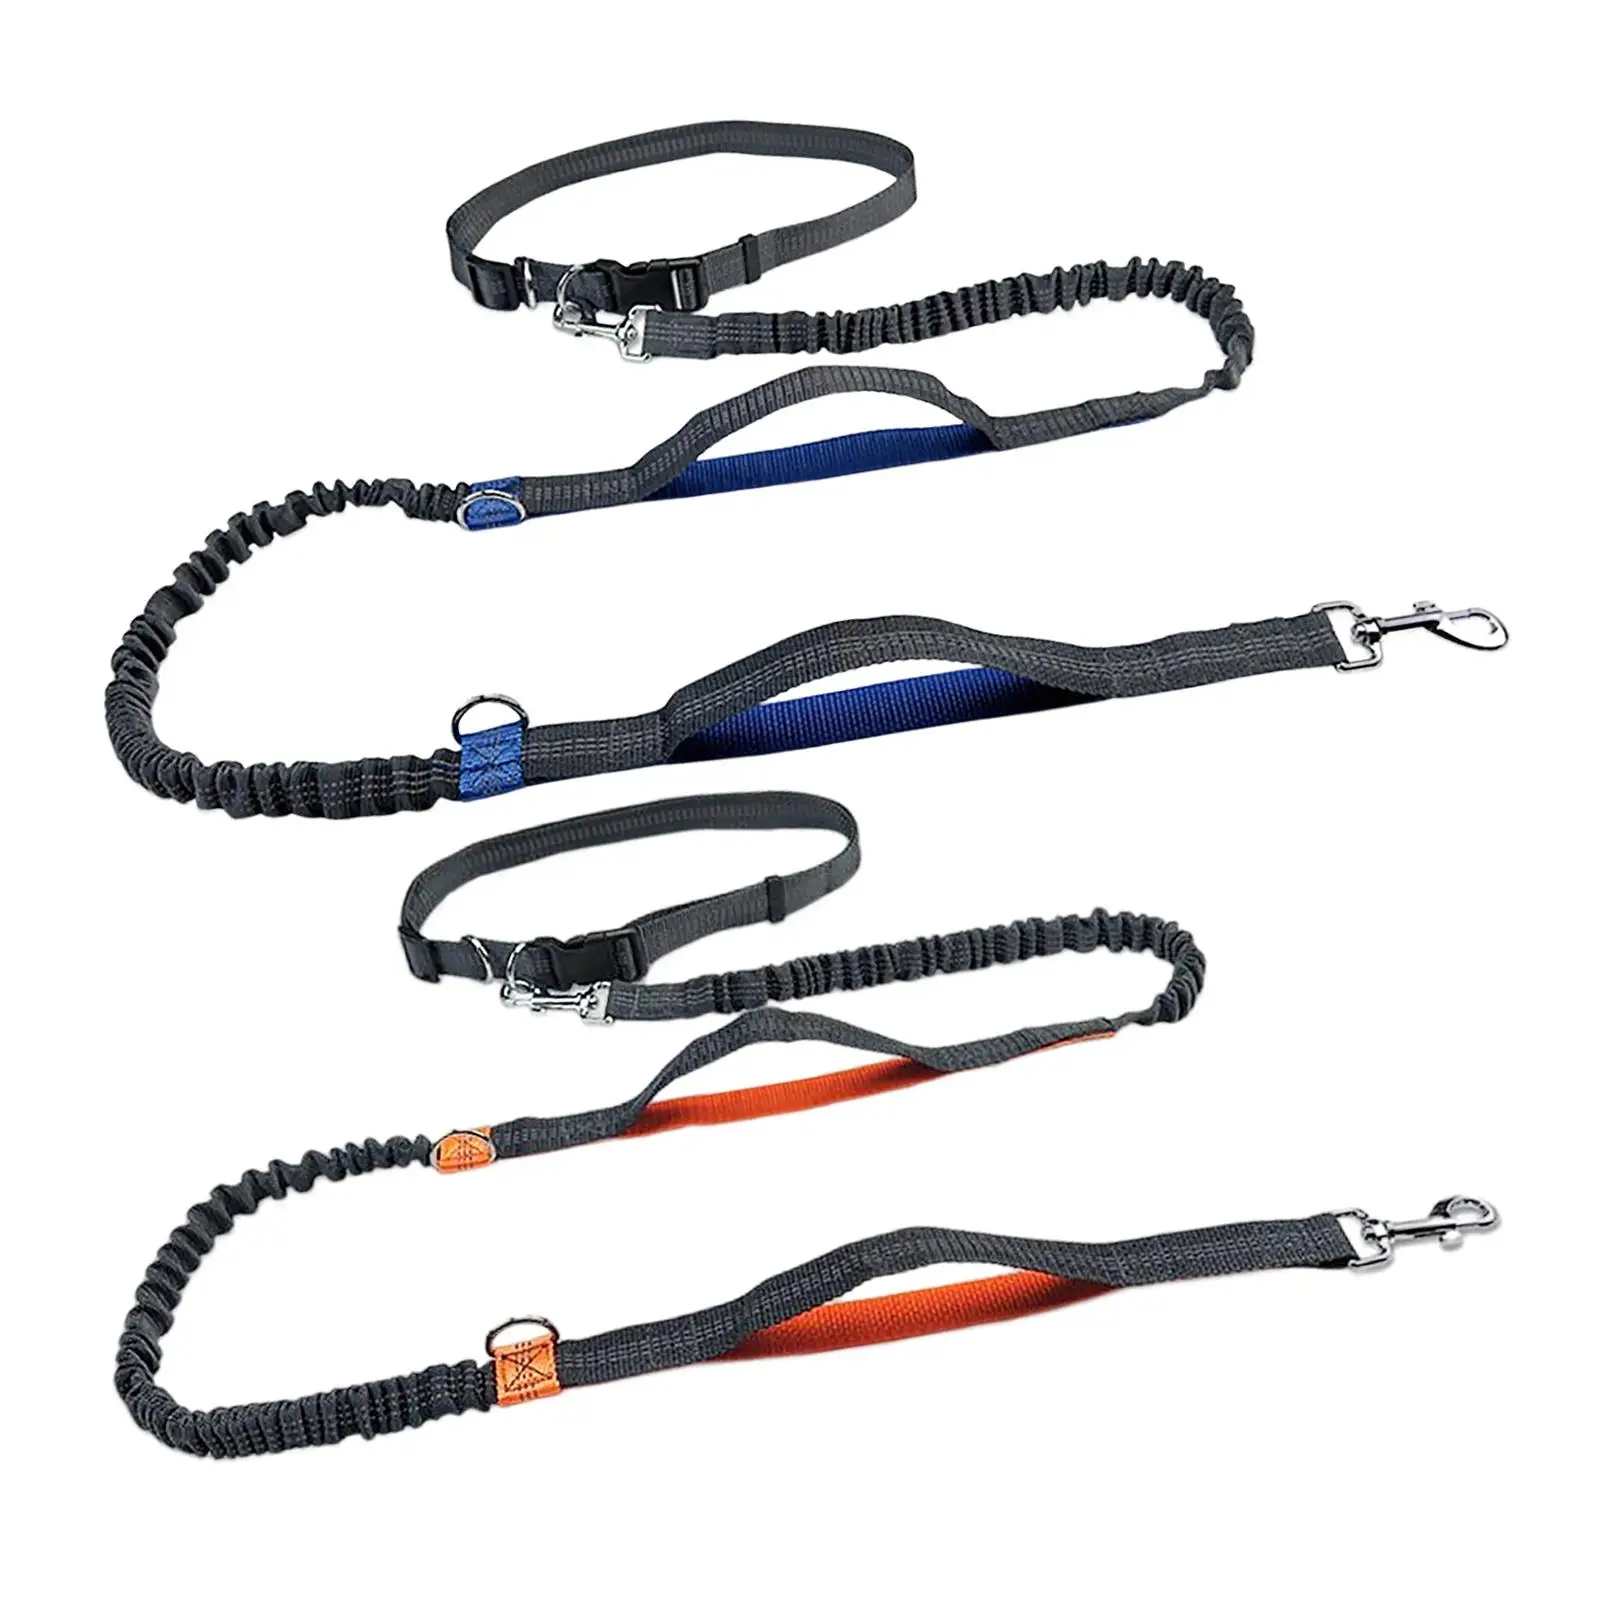 Hands  Leash Adjustable Walking Running Dog Leash with Control Safety Handle And Heavy Duty Clasp for Small Medium Large Dogs